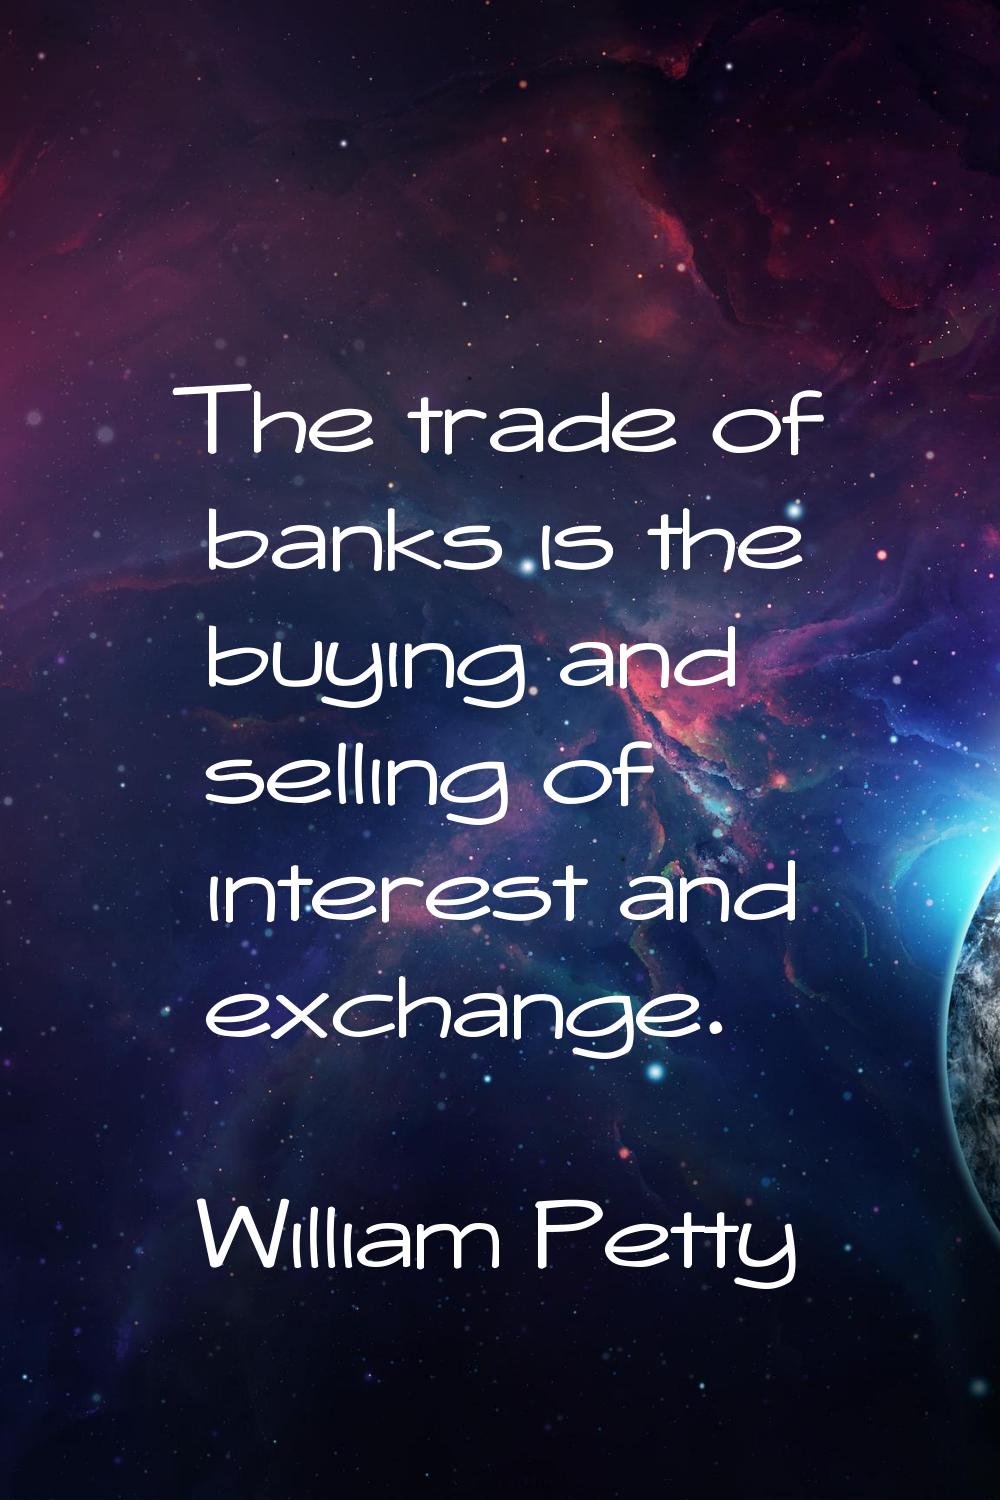 The trade of banks is the buying and selling of interest and exchange.